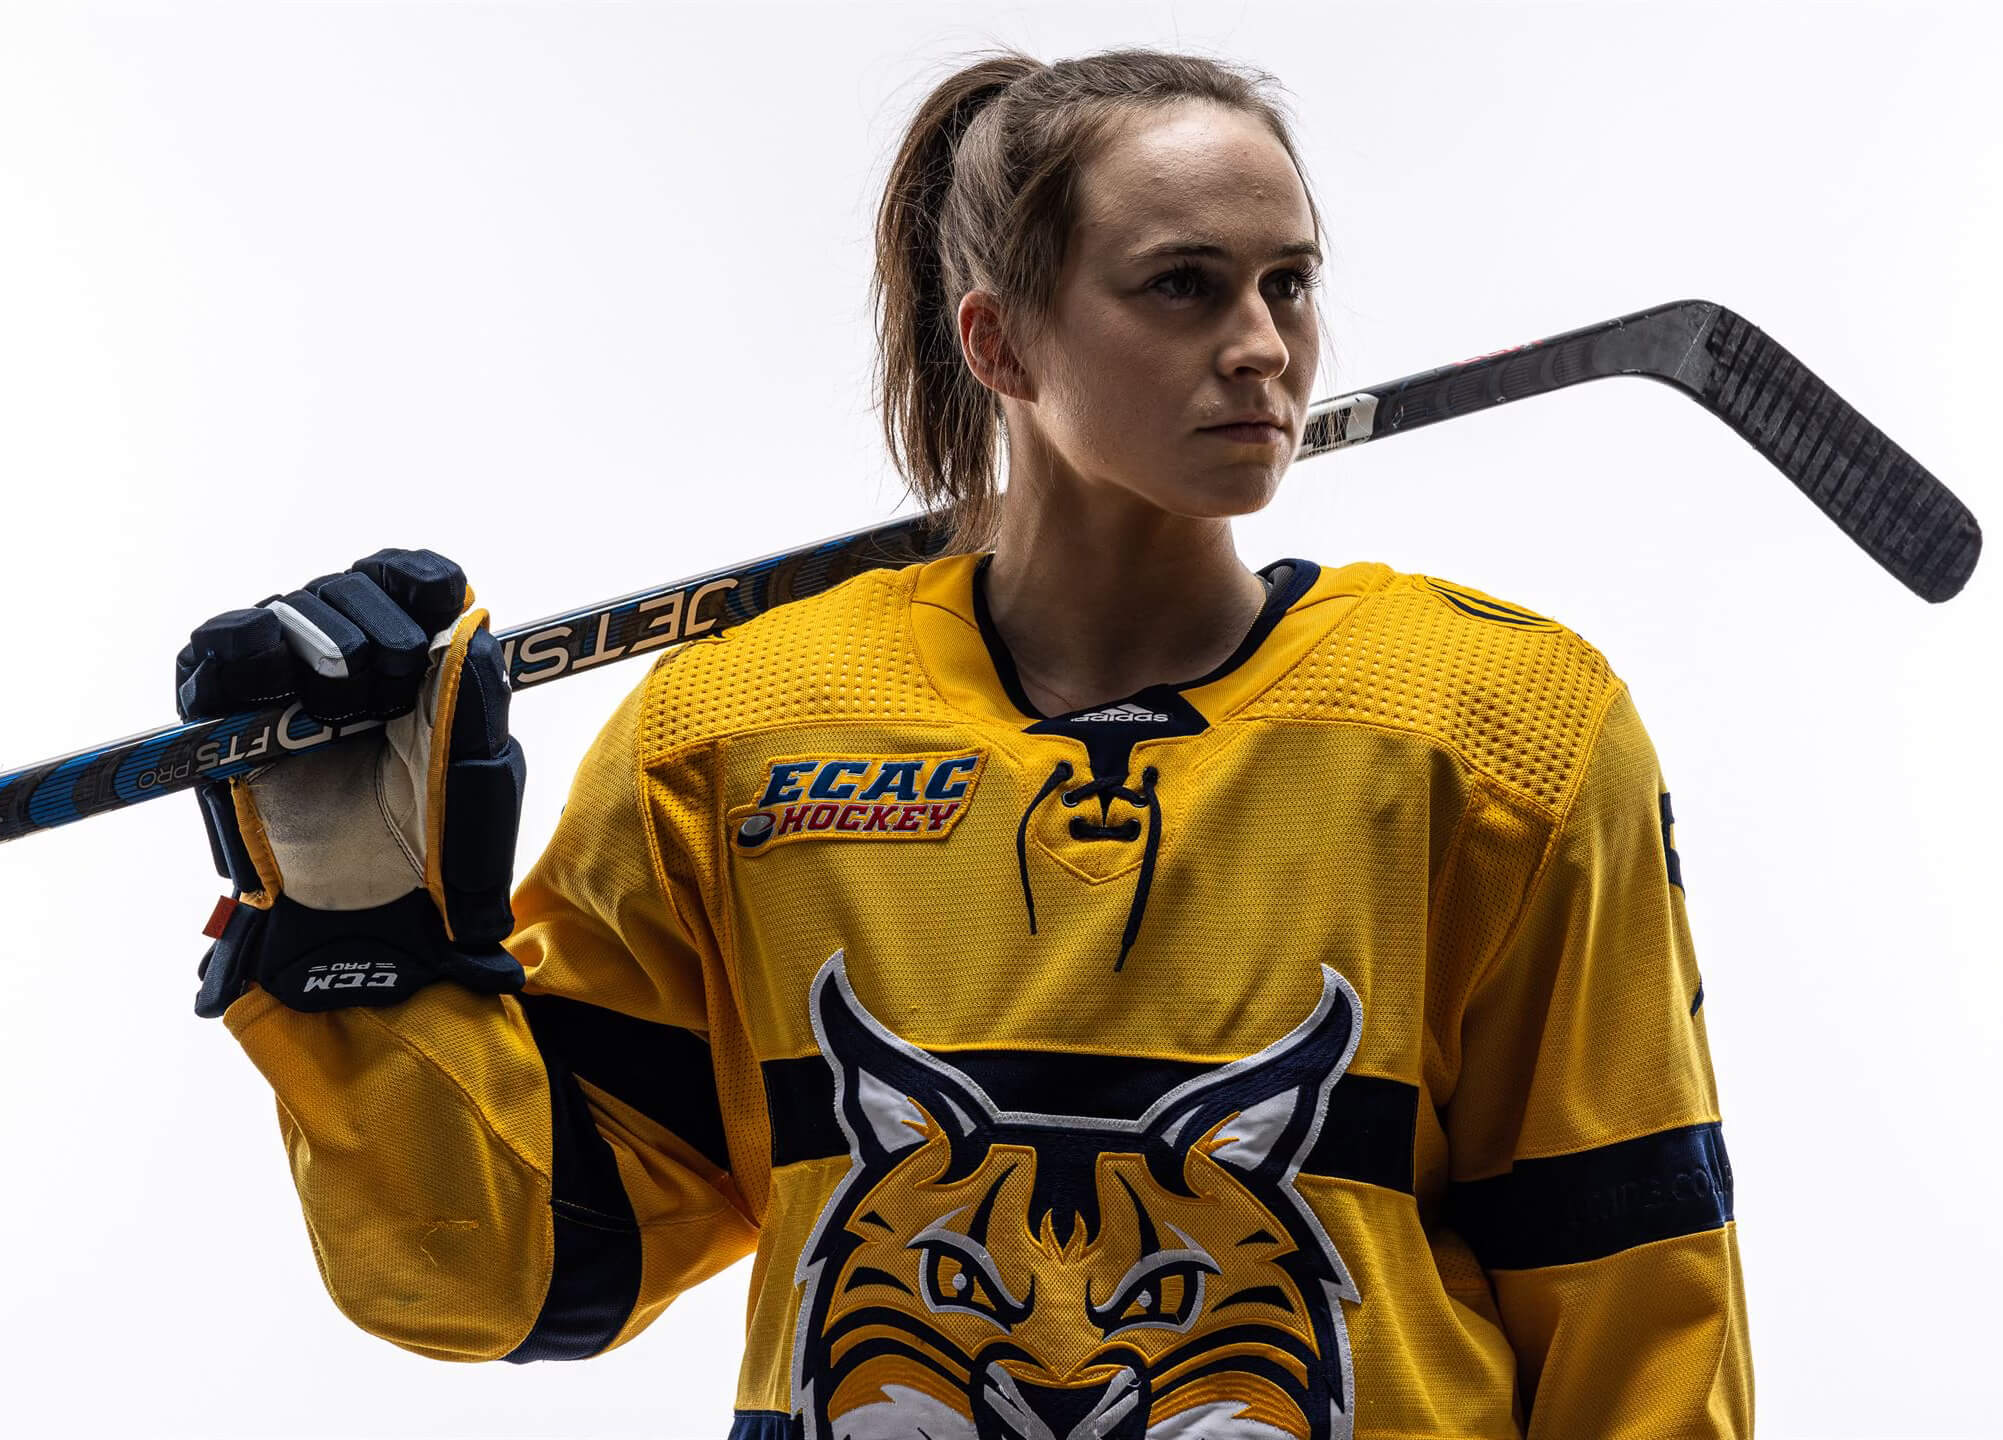 Women's hockey team member Kate Reilly poses for the camera